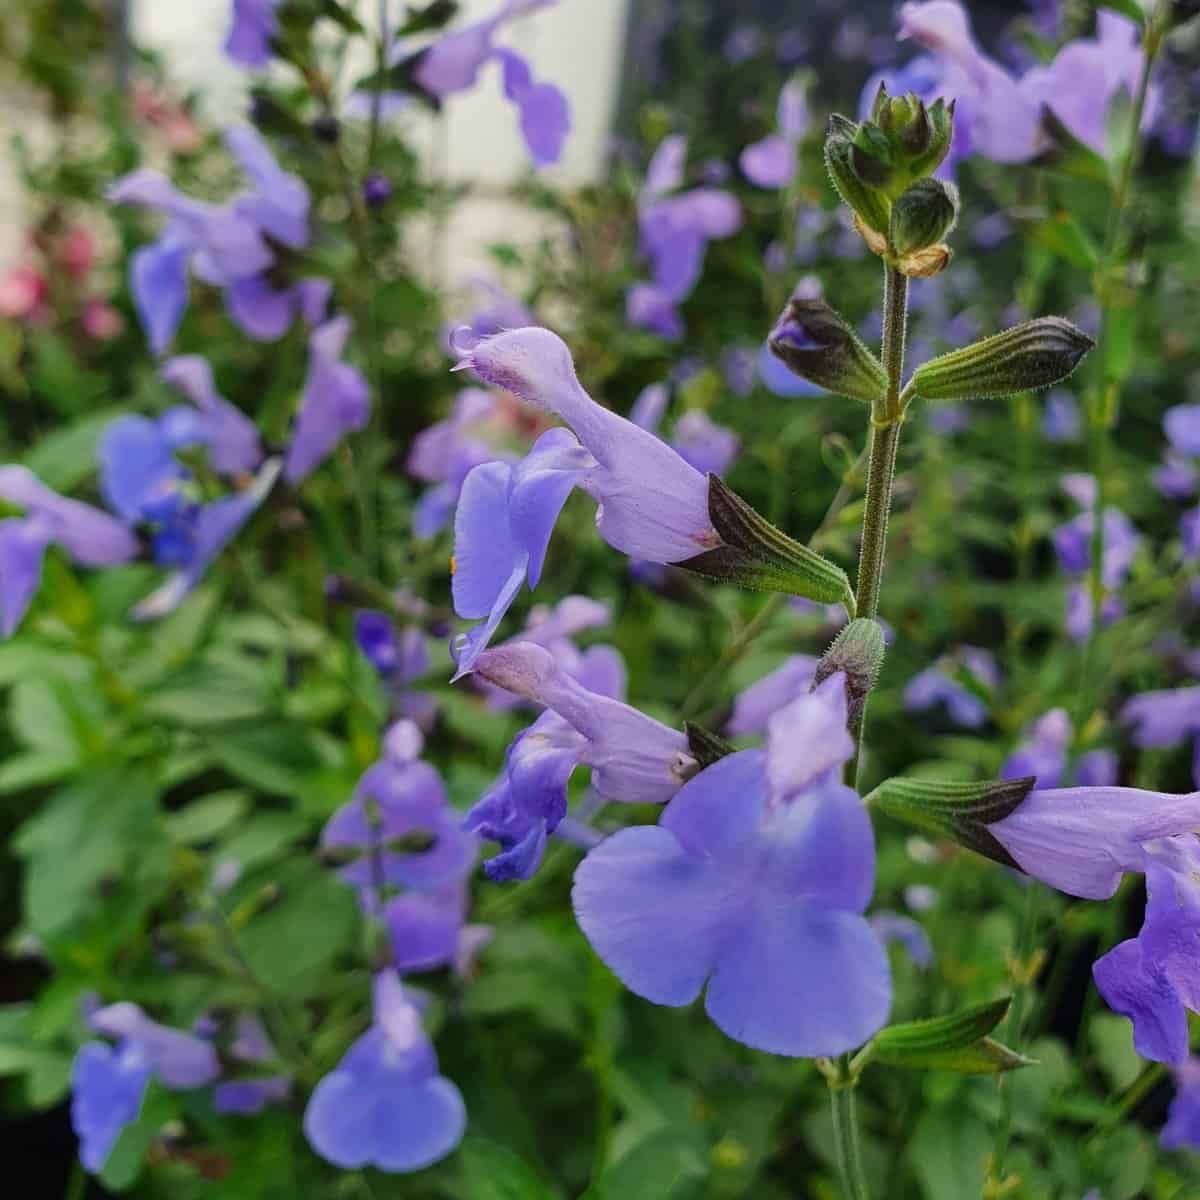 Salvia microphylla 'Delice Aquamarine' is a true stunner! It’s undoubtedly among our most popular Salvias, adored by everyone! #gardening #gardenlover #gardenlife #gardeninglove #plants #plantlover #gardening #plants #plantnursery #gardenallotment #salvia #flowersofinstagram